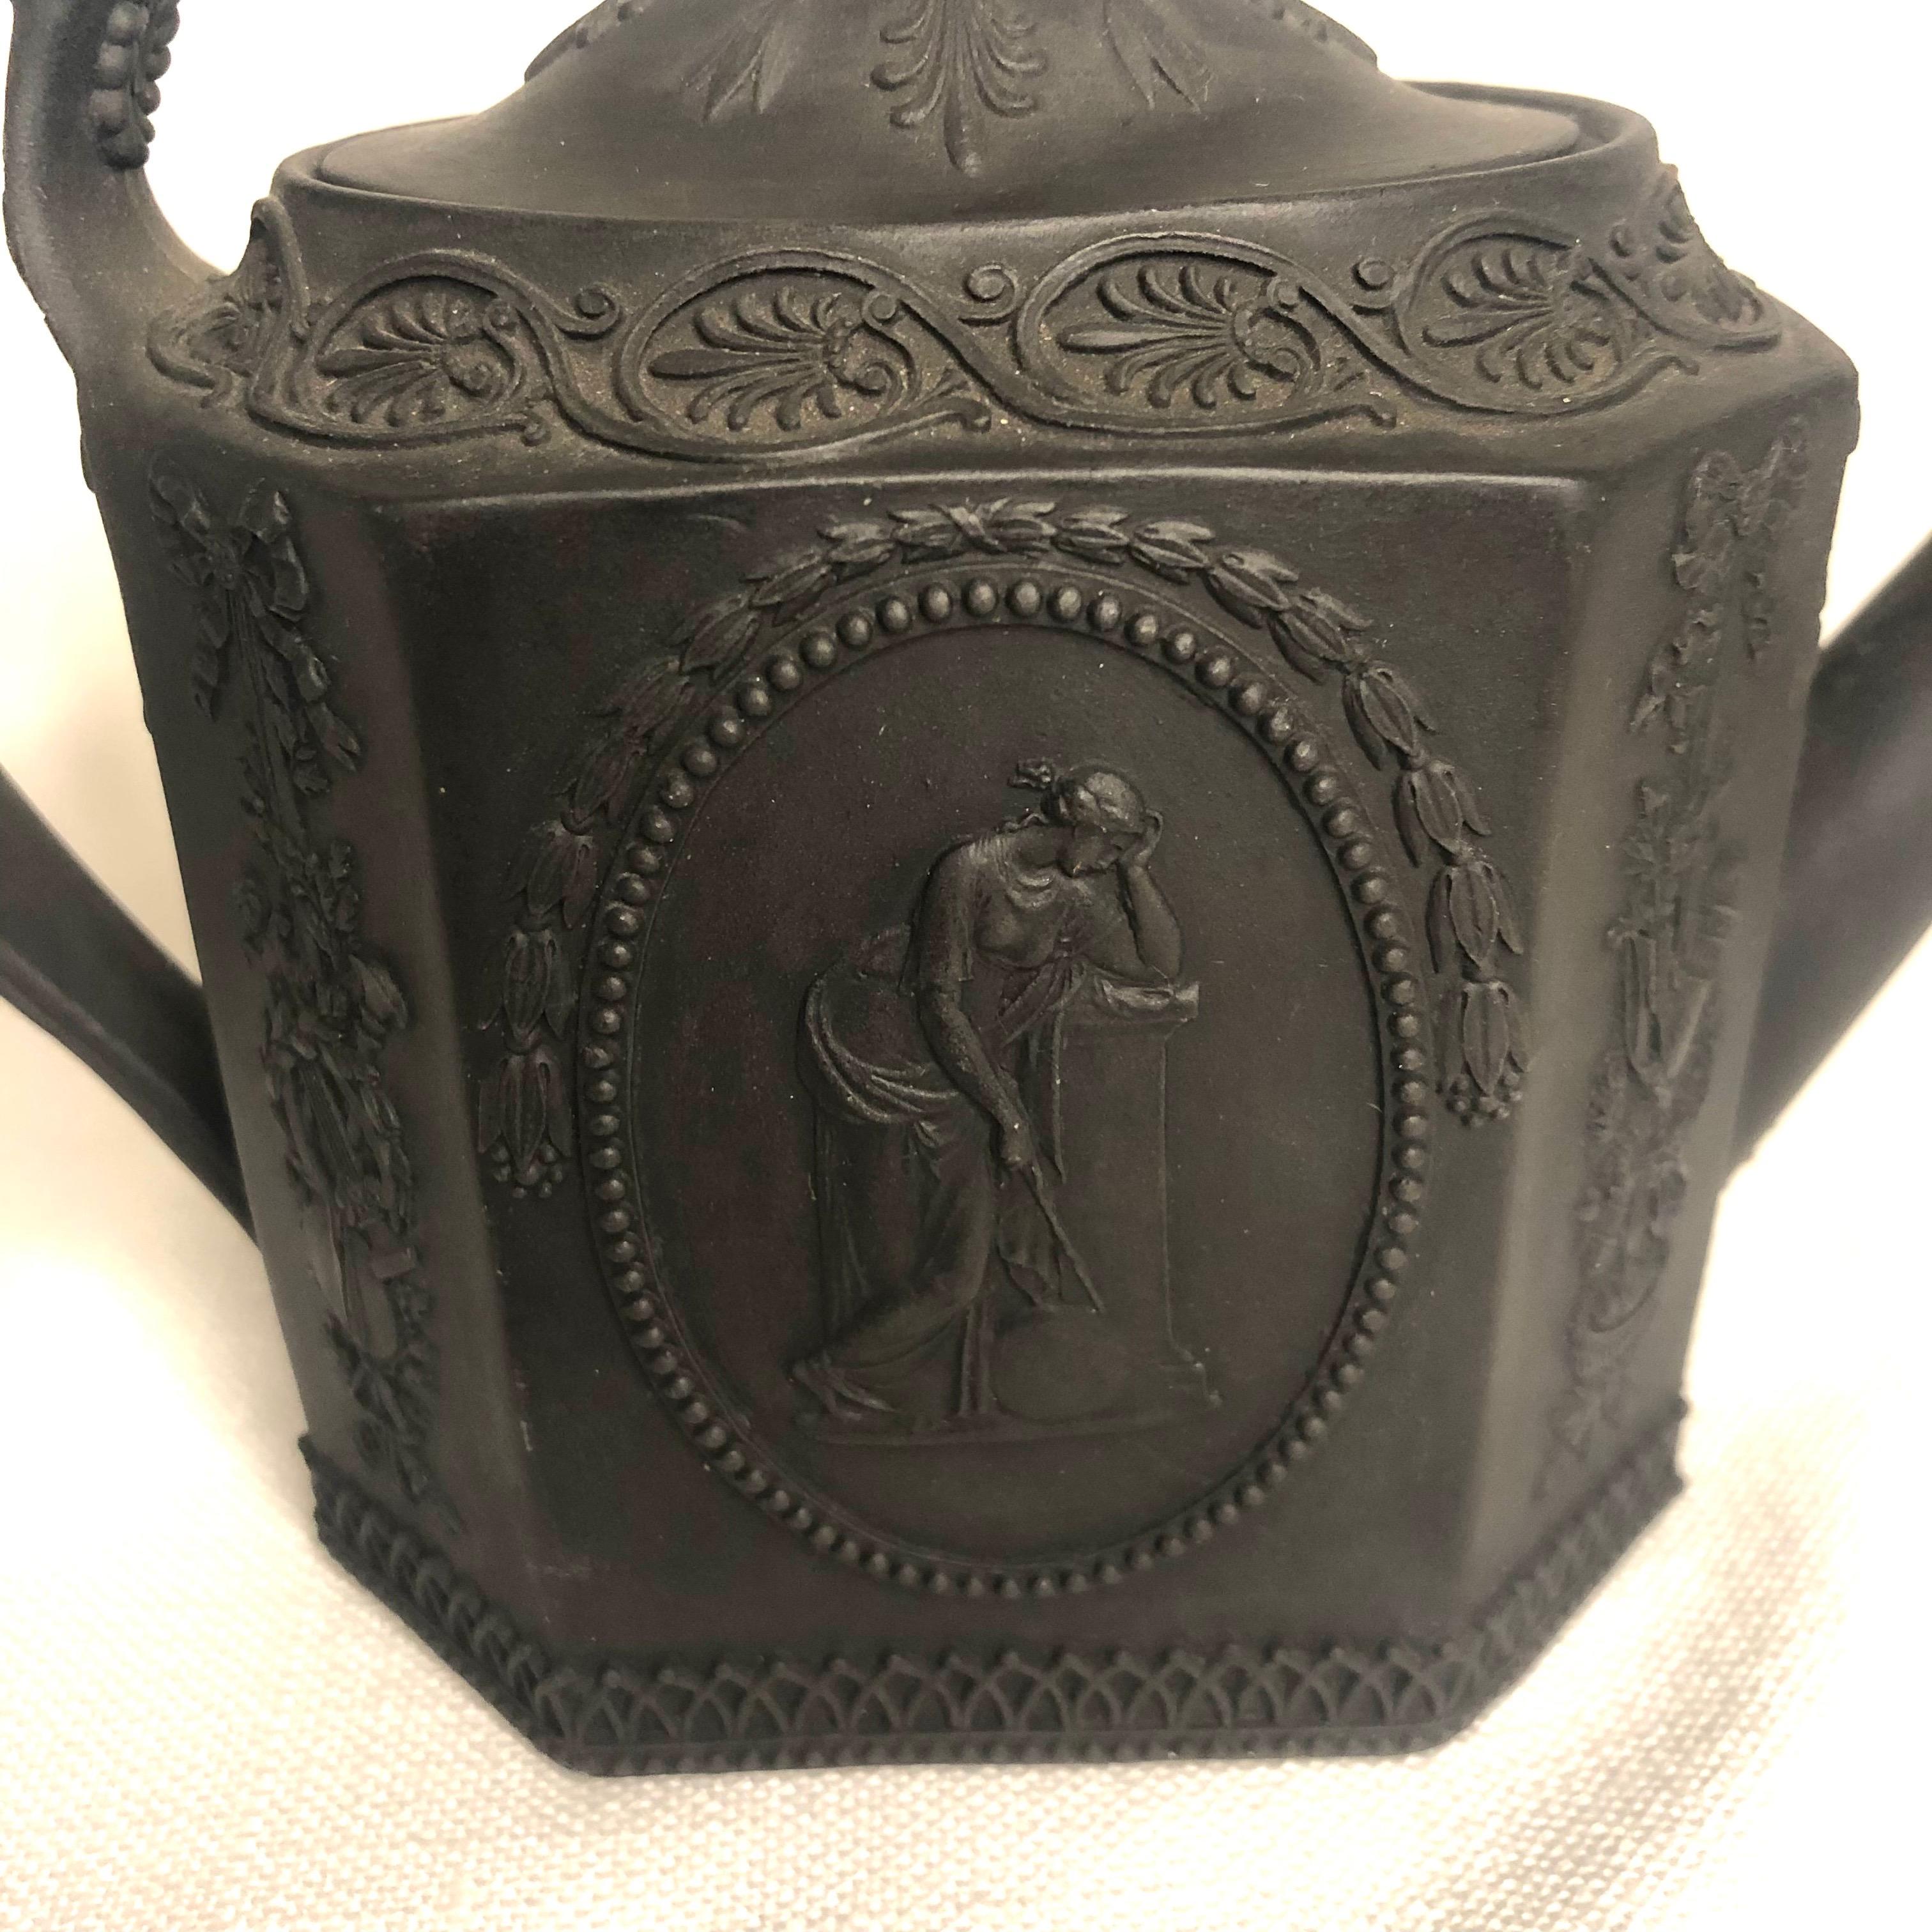 English Basalt Wedgwood Teapot with Medallions of Man with Lyre and Lady on Pedestal For Sale